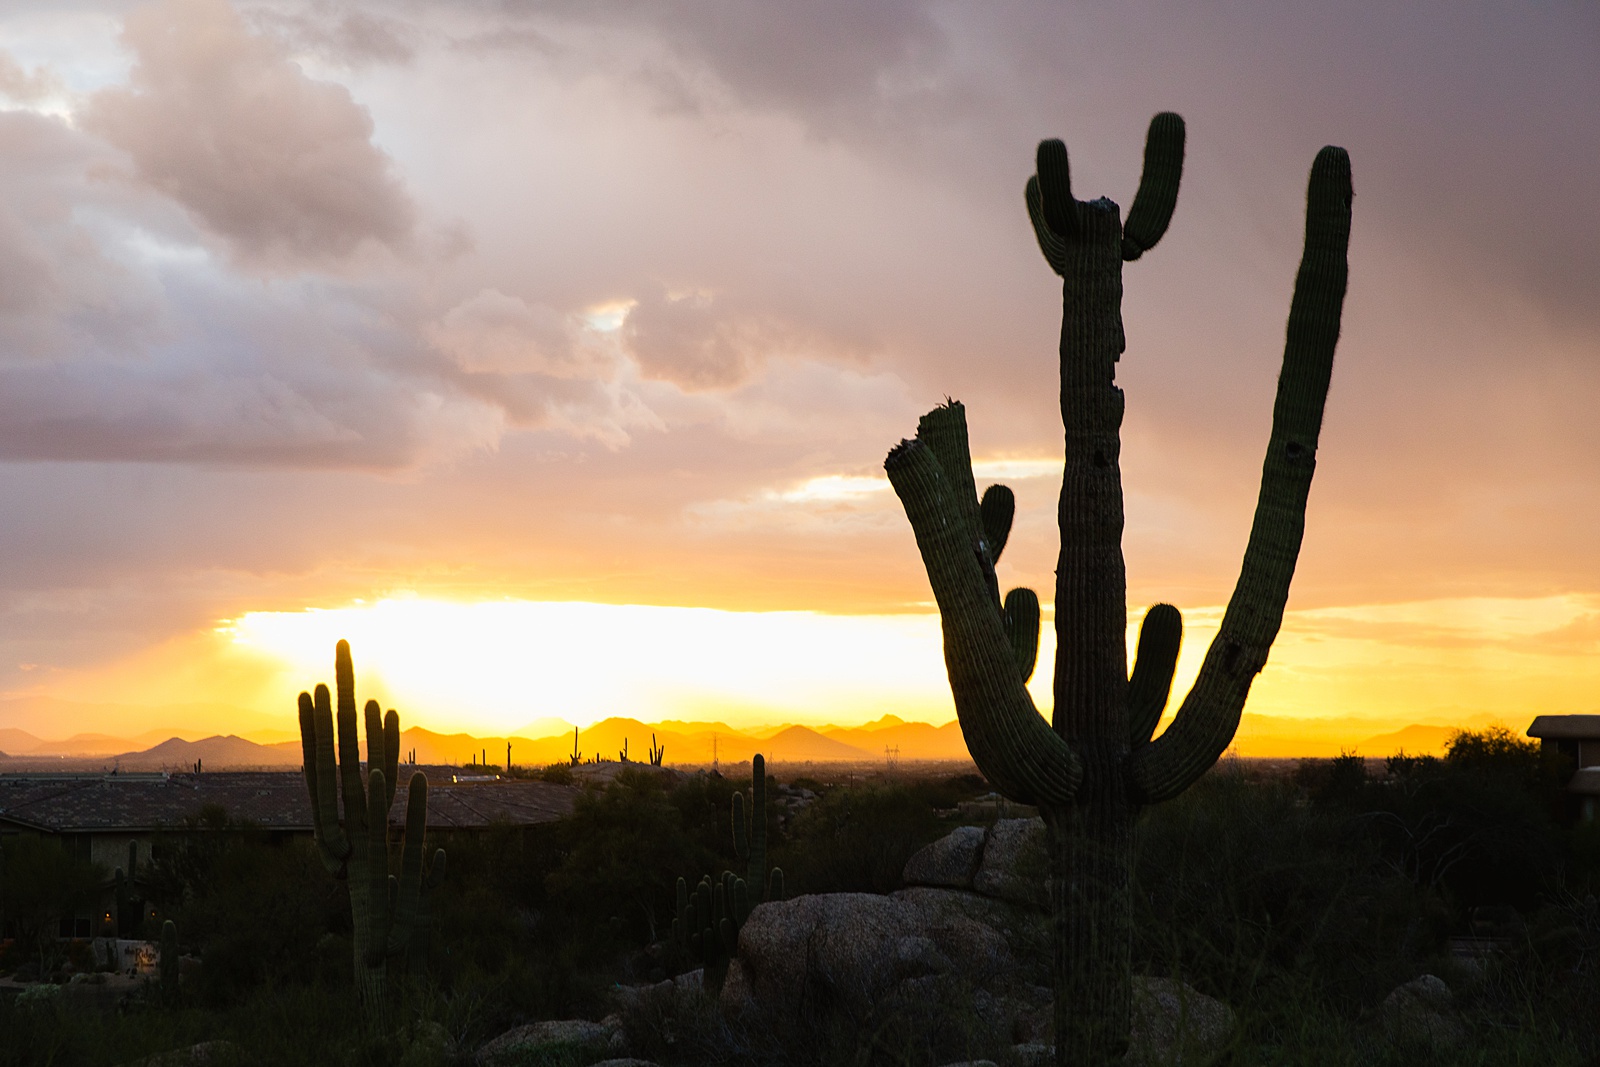 Silhouette of a cactus at sunset by PMA Photography.